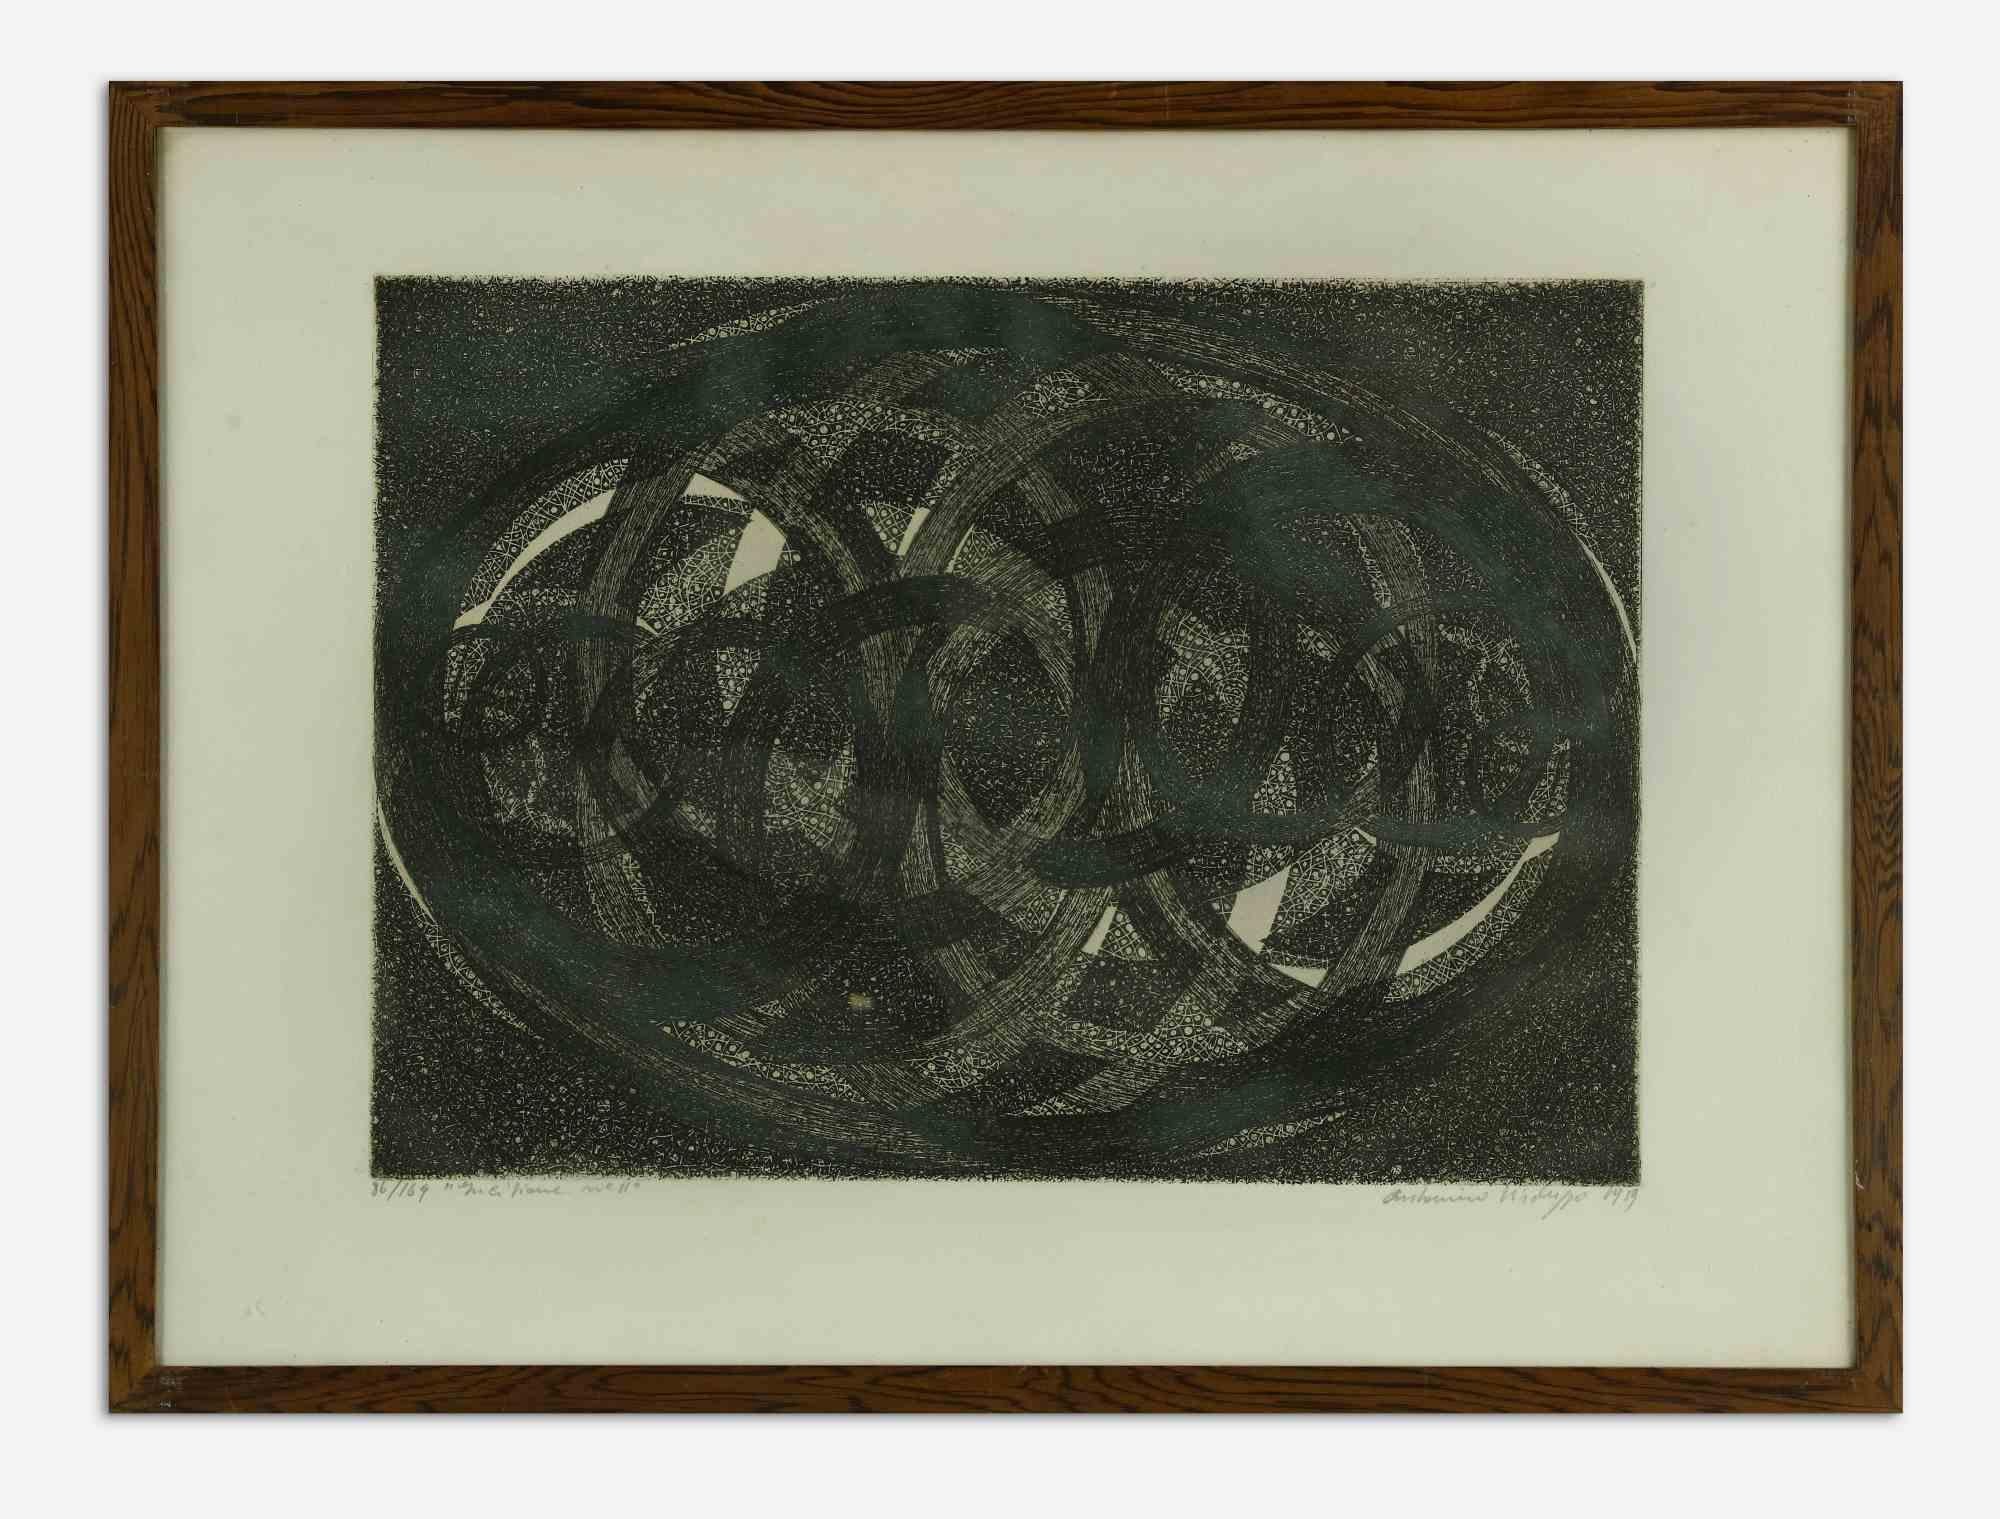 Untitled is a modern artwork realized by Antonino Verduzzo in 1959.

Black and white etching.

Hand signed, dated and numbered on the lower margin.

Edition of 86/169.

Includes frame: 51 x 2 x 69 cm